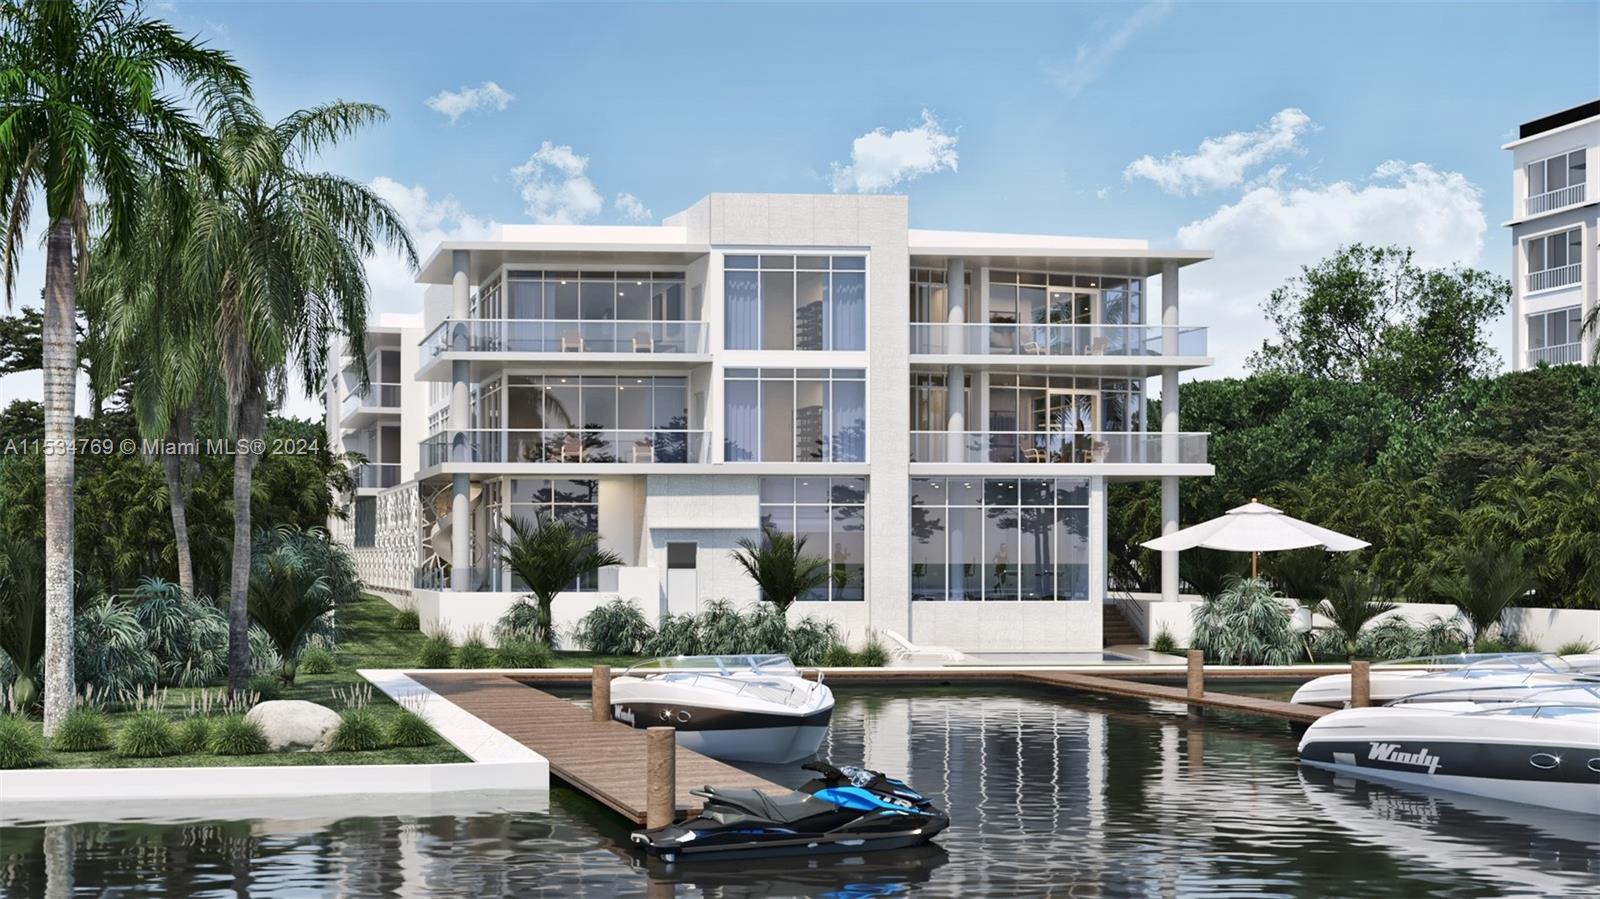 Marina del Río Residences, a new boutique waterfront development consisting of 10 beautifully appointed apartments in prime Coral Ridge neighborhood. Each residence has been meticulously designed: living spaces are bright and airy thanks to floor to ceiling walls of glass, master bedrooms are generous in size as are his and her closets. Kitchens are Italian style cabinetry fitted with top of the line appliances and waterfall quartz countertops. Marina del Río residences offers an array amenities from paddle boards, a full gym, a storage room and 2 parking spaces . Enjoy a quiet and upscale neighborhood with A+ school, close to Las Olas boulevard and beach. Presale Delivery End 2024